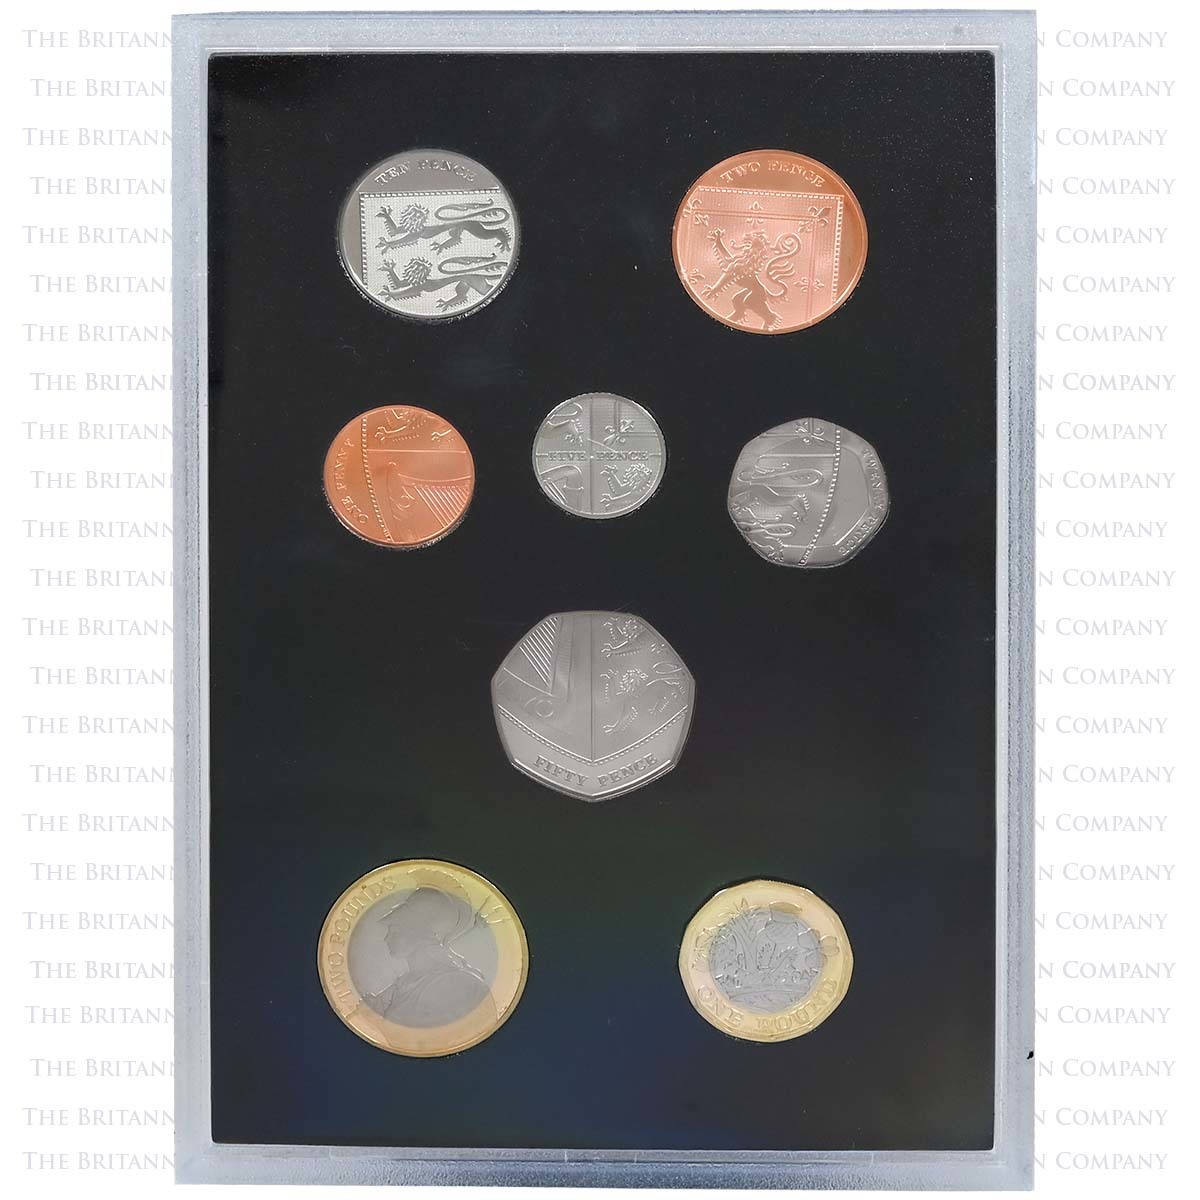 2019-proof-coin-set-collector-edtition-004-m